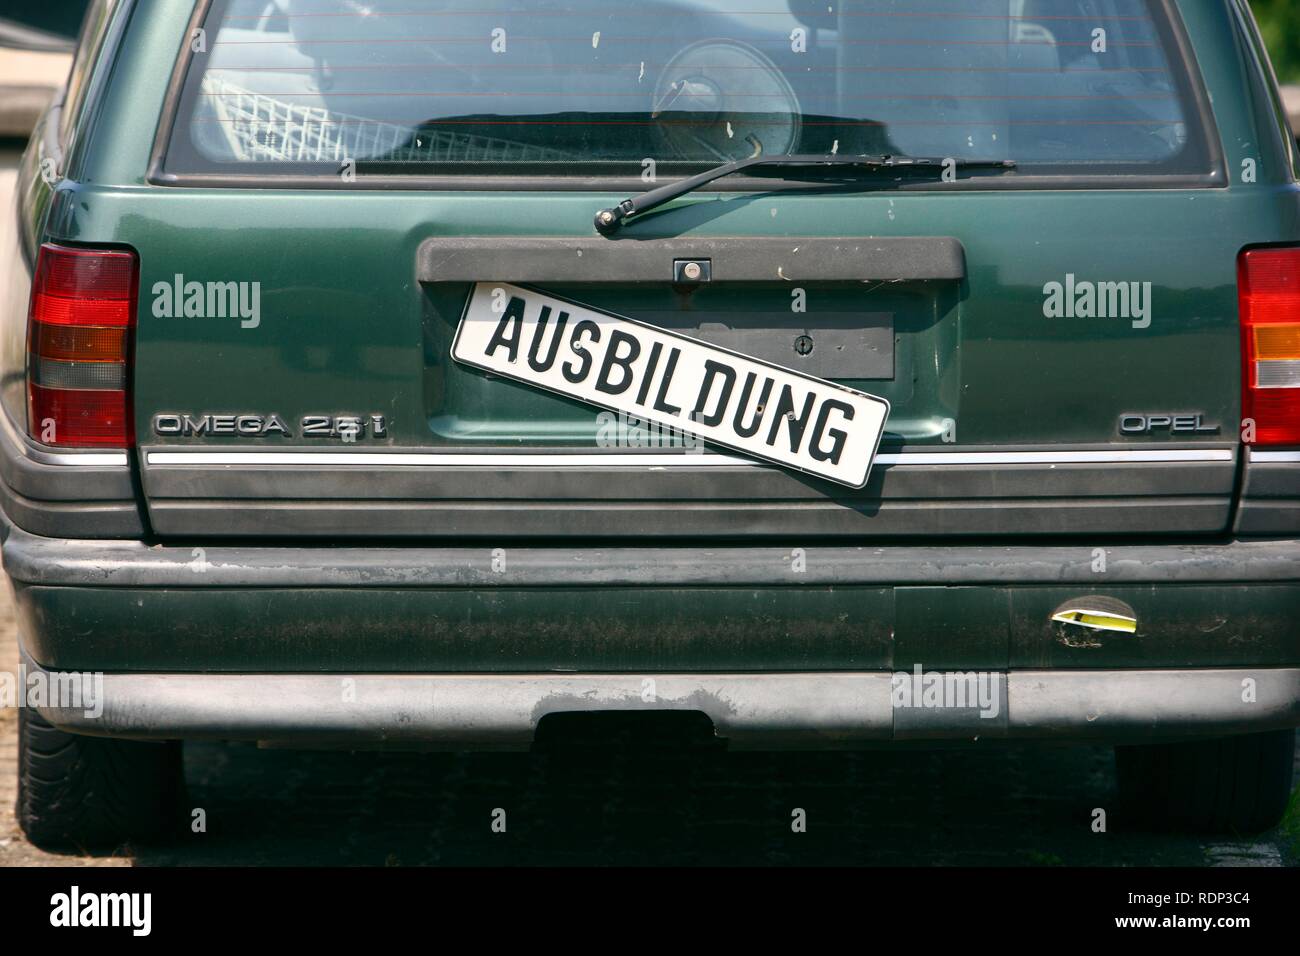 Old Opel Omega being used as a training vehicle, sign in German saying 'Ausbildung', 'training' Stock Photo